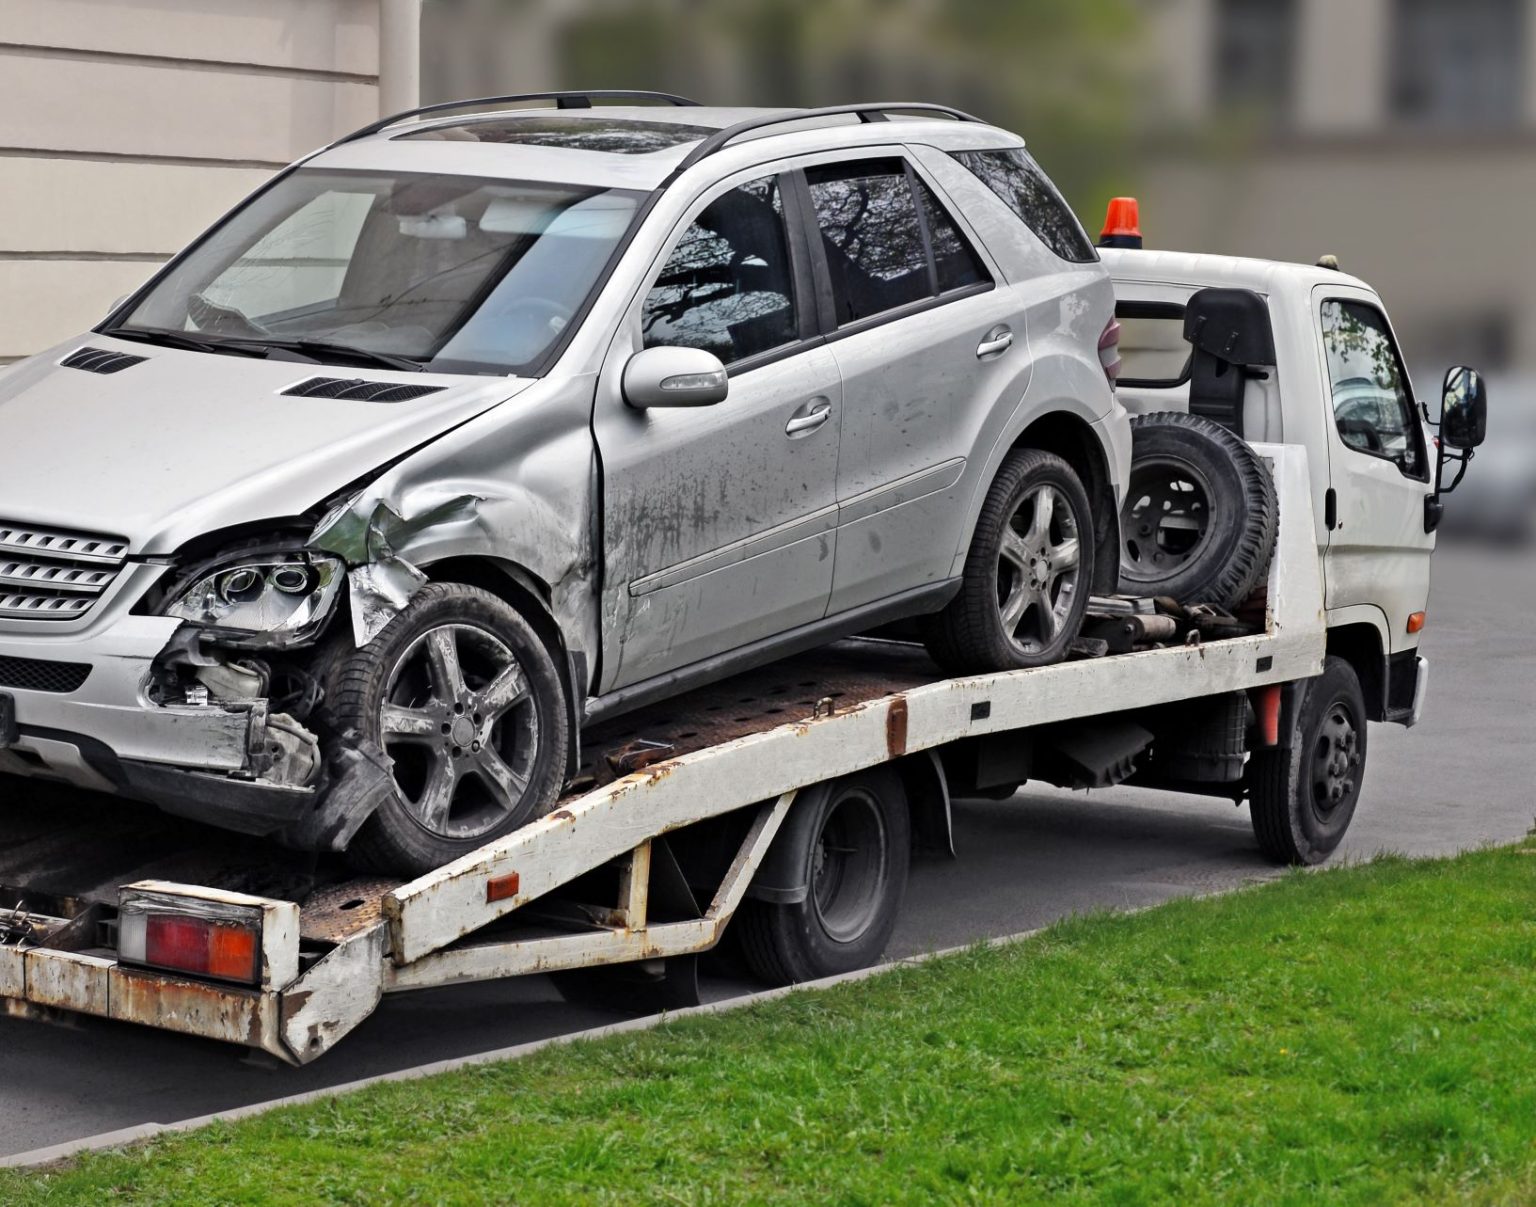 The Emotional and Practical Benefits of Professional Vehicle Recovery